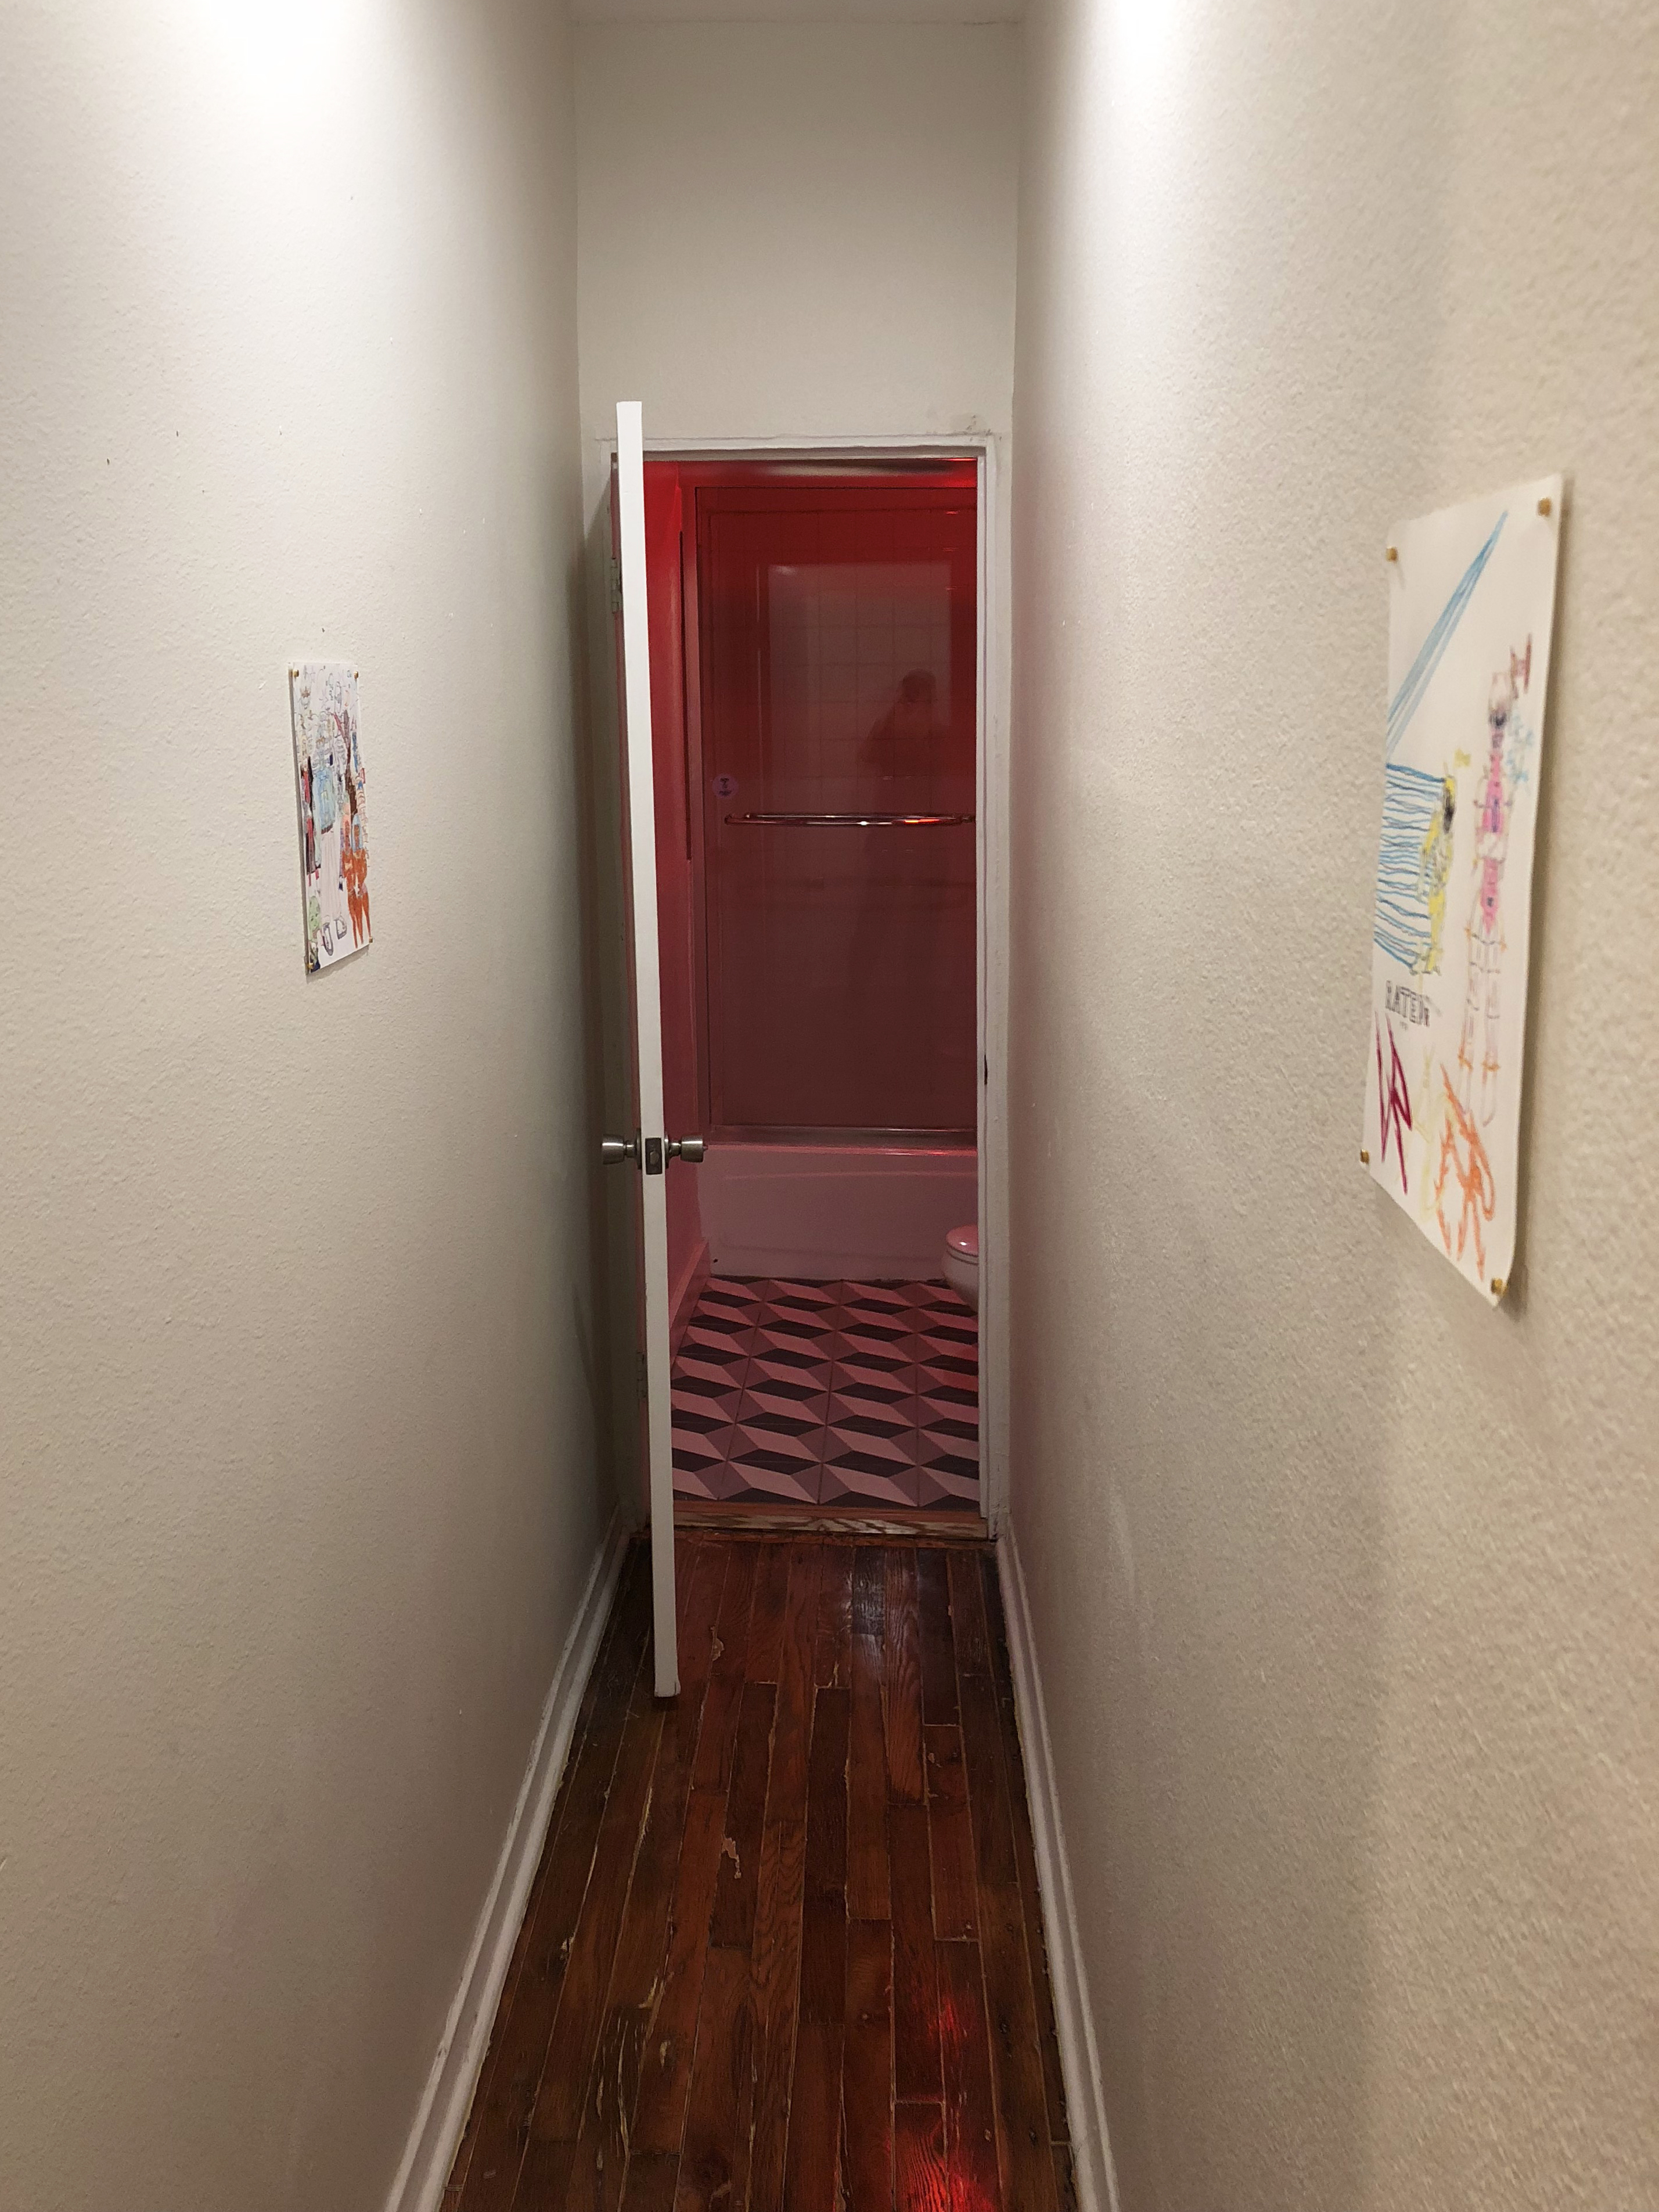 Two drawings hung in a narrow hallway leading to a bathroom with red lighting in it